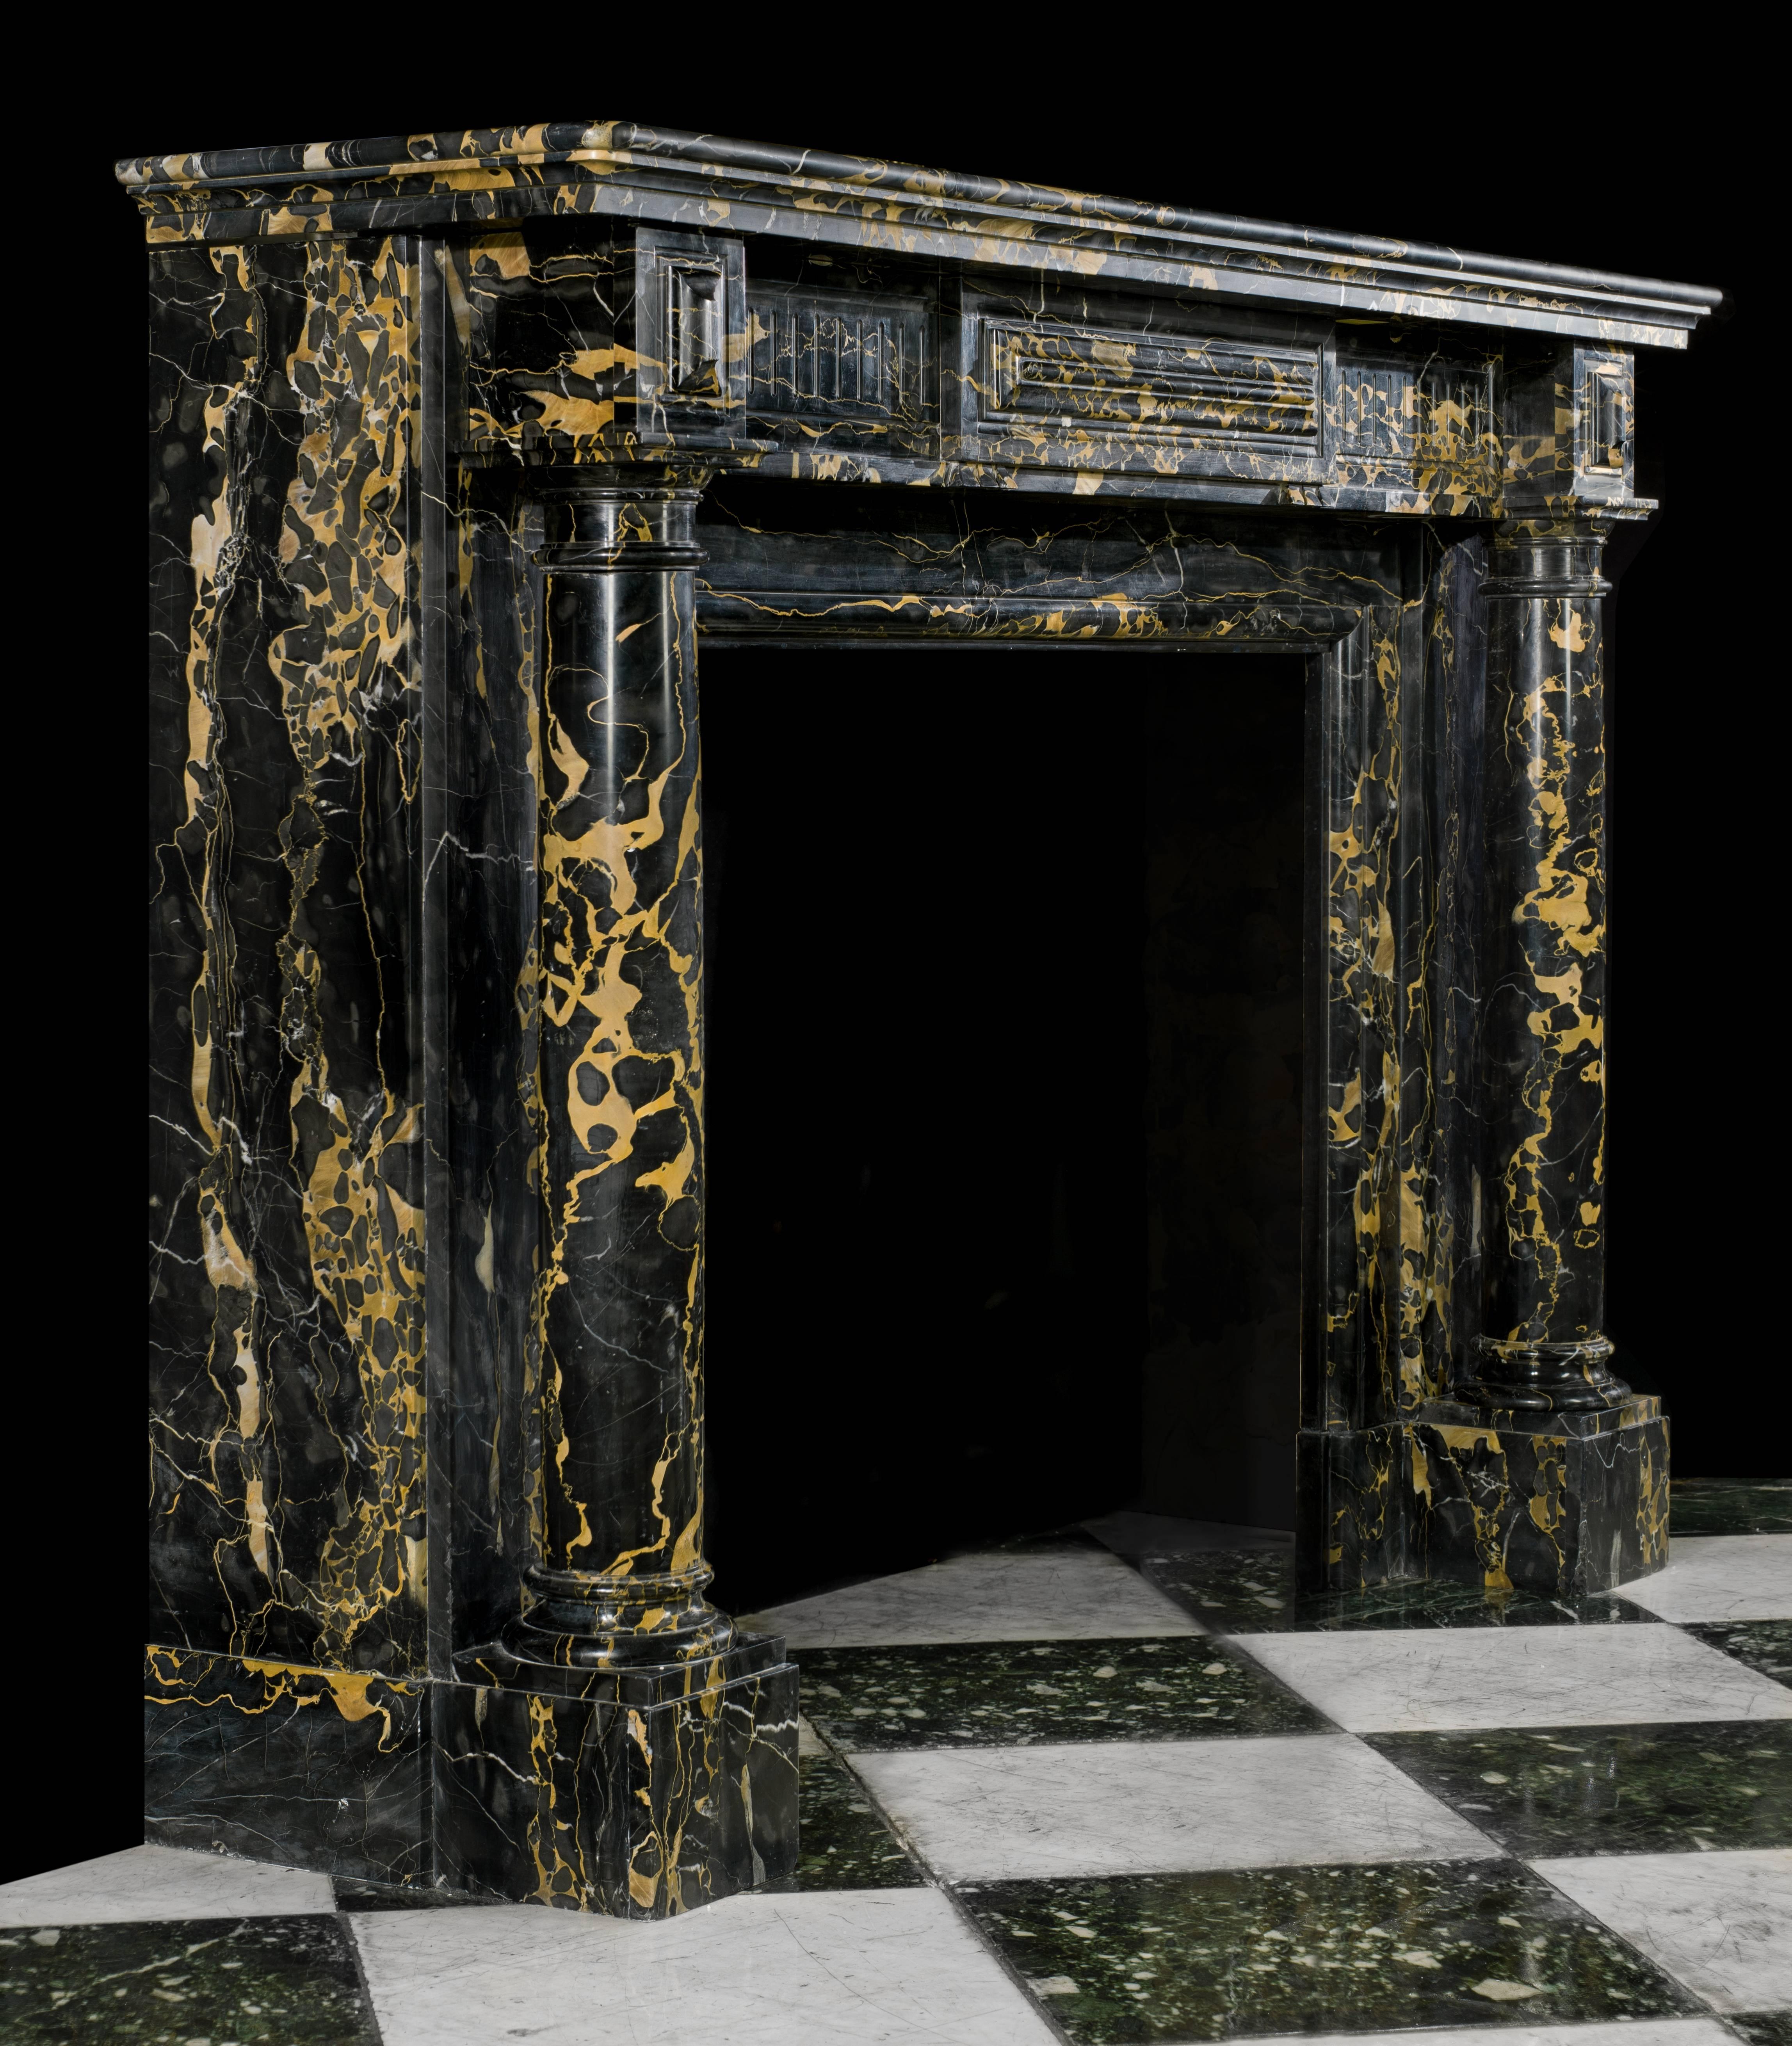 A most attractive French Regency columned antique fireplace surround in very fine black and gold veined Italian Portoro Marble. The moulded shelf is set above a fluted and cushion panelled freeze which is flanked by a pair of lozenge end blocks